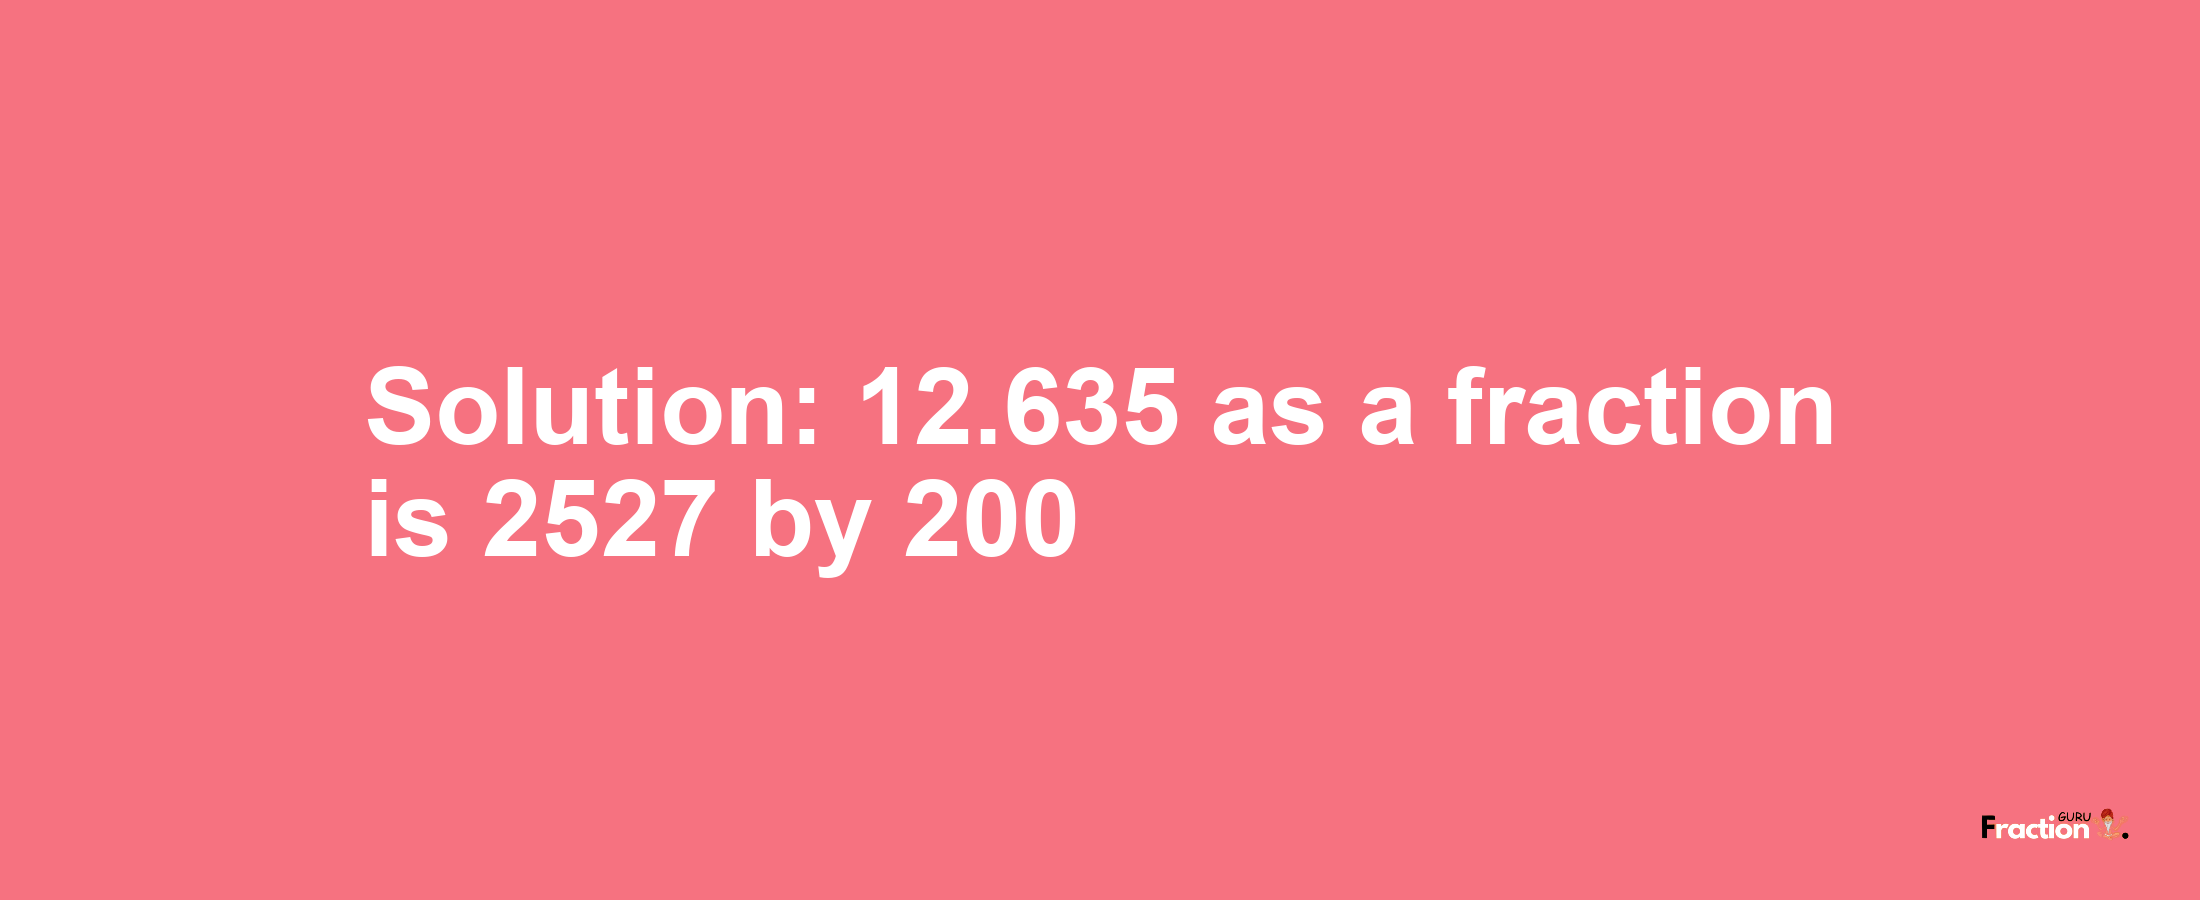 Solution:12.635 as a fraction is 2527/200